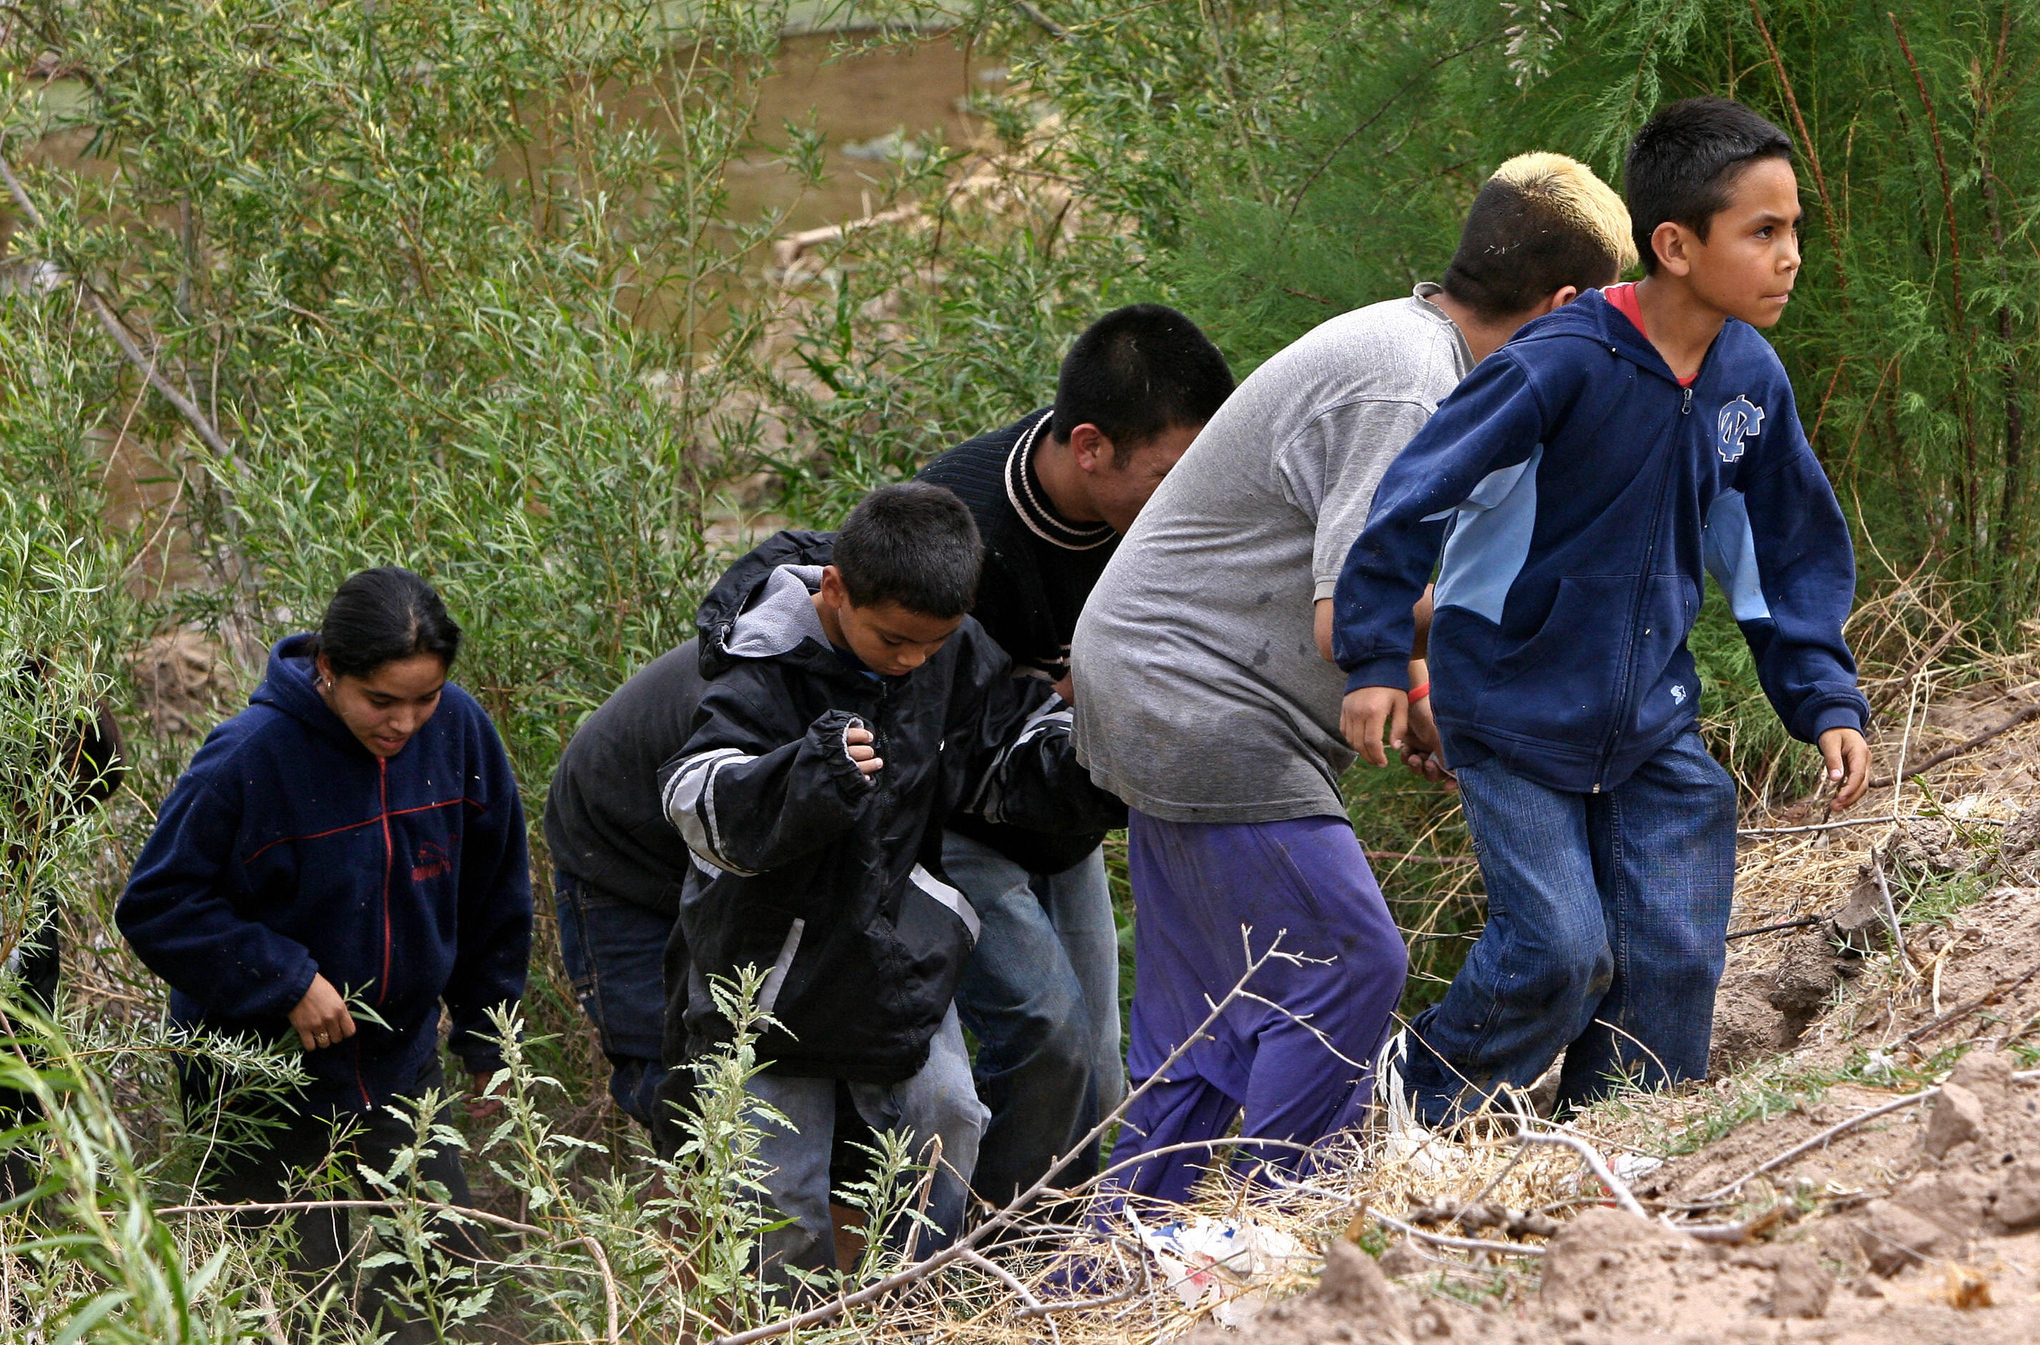 A Guatemalan family crossing the border from Mexico.